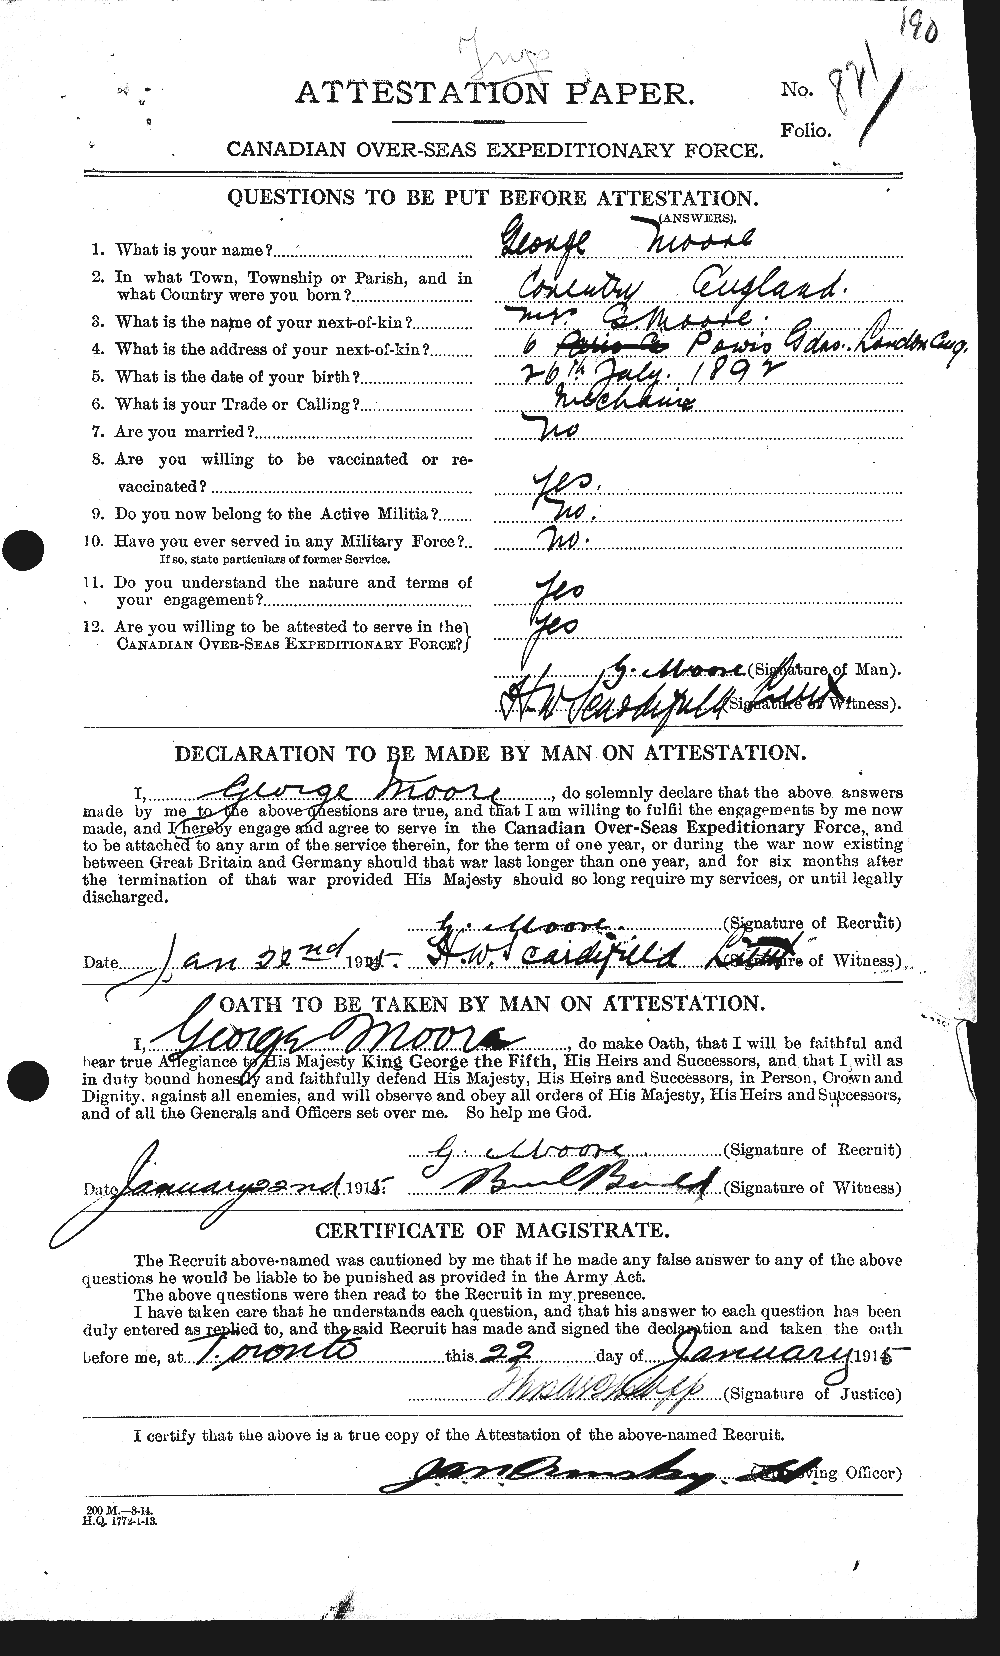 Personnel Records of the First World War - CEF 509406a